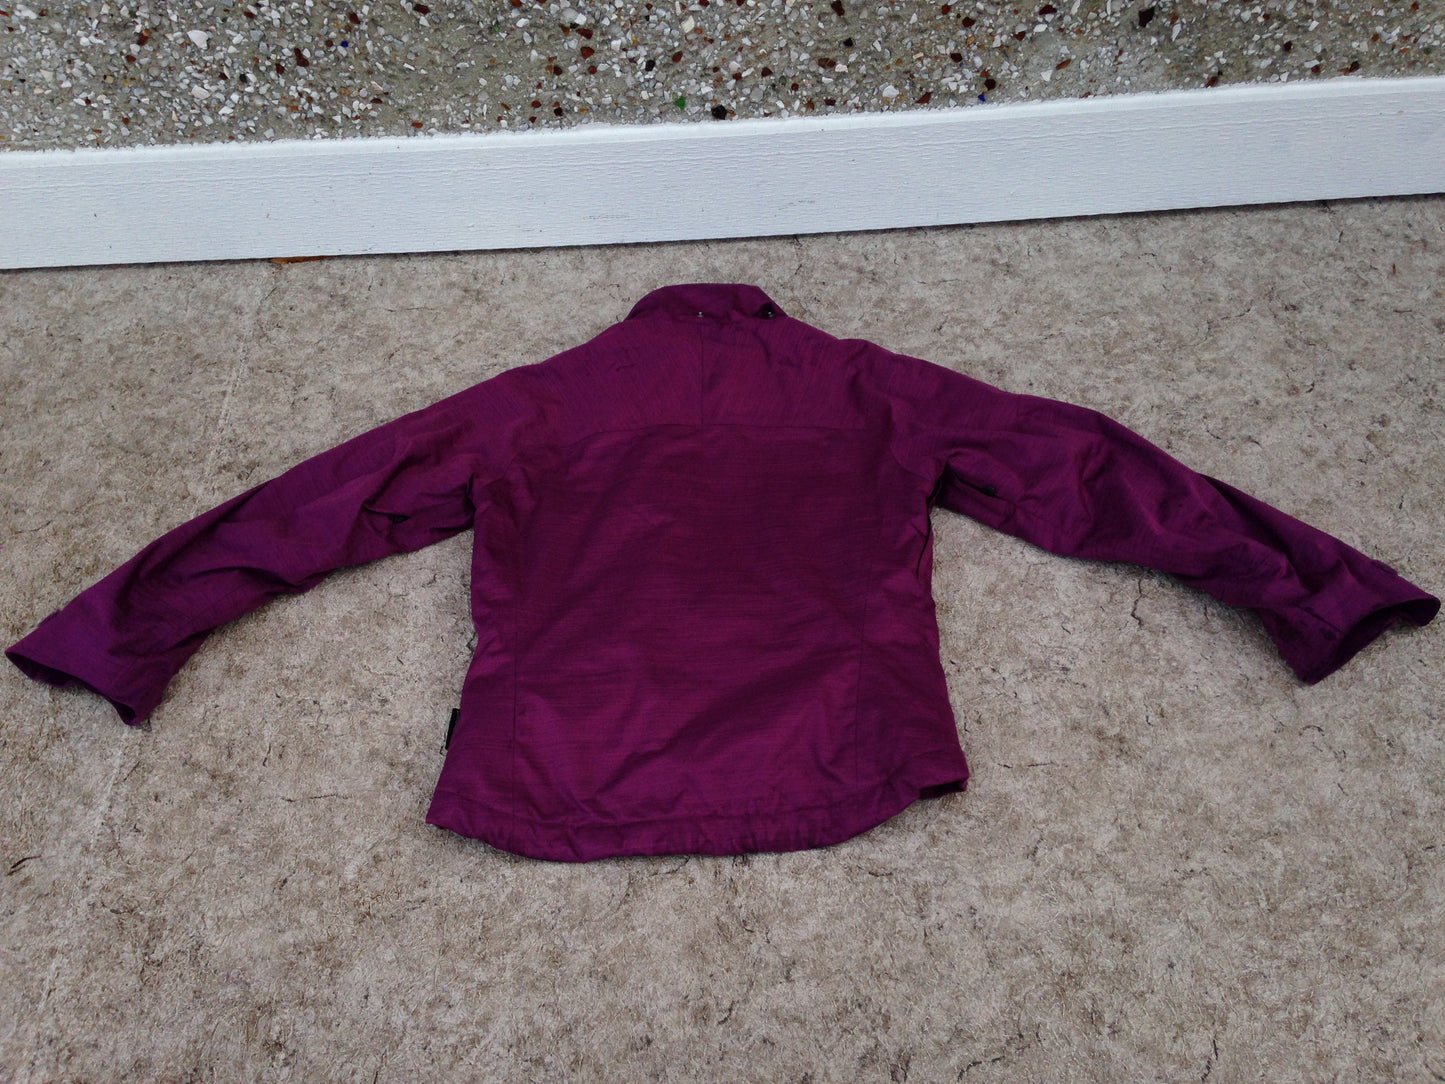 Winter Coat Child Size 12 Helly Hansen Purple With Snow Belt Waterproof Sealed Zippers and Seams No Hood Excellent